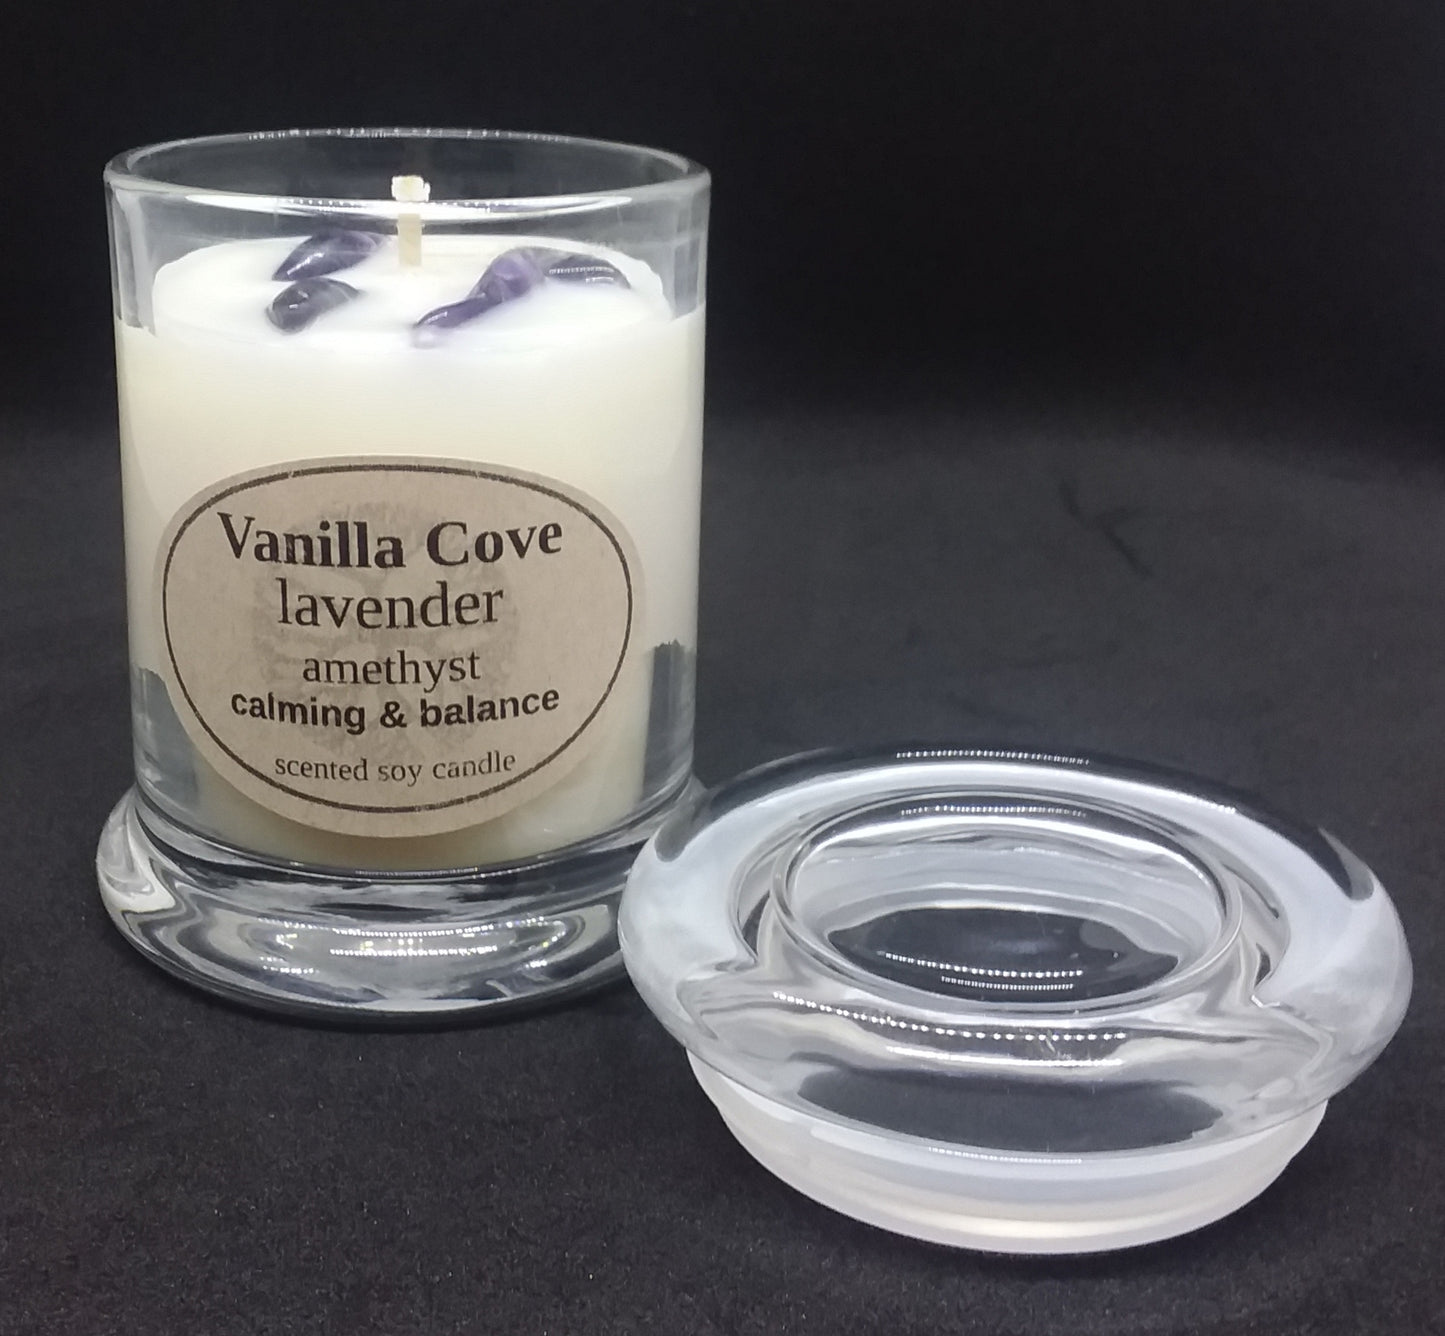 Vanilla Cove Soy Candle 45 hour lavender fragrance with amethyst crystals in clear glass jar and glass lid